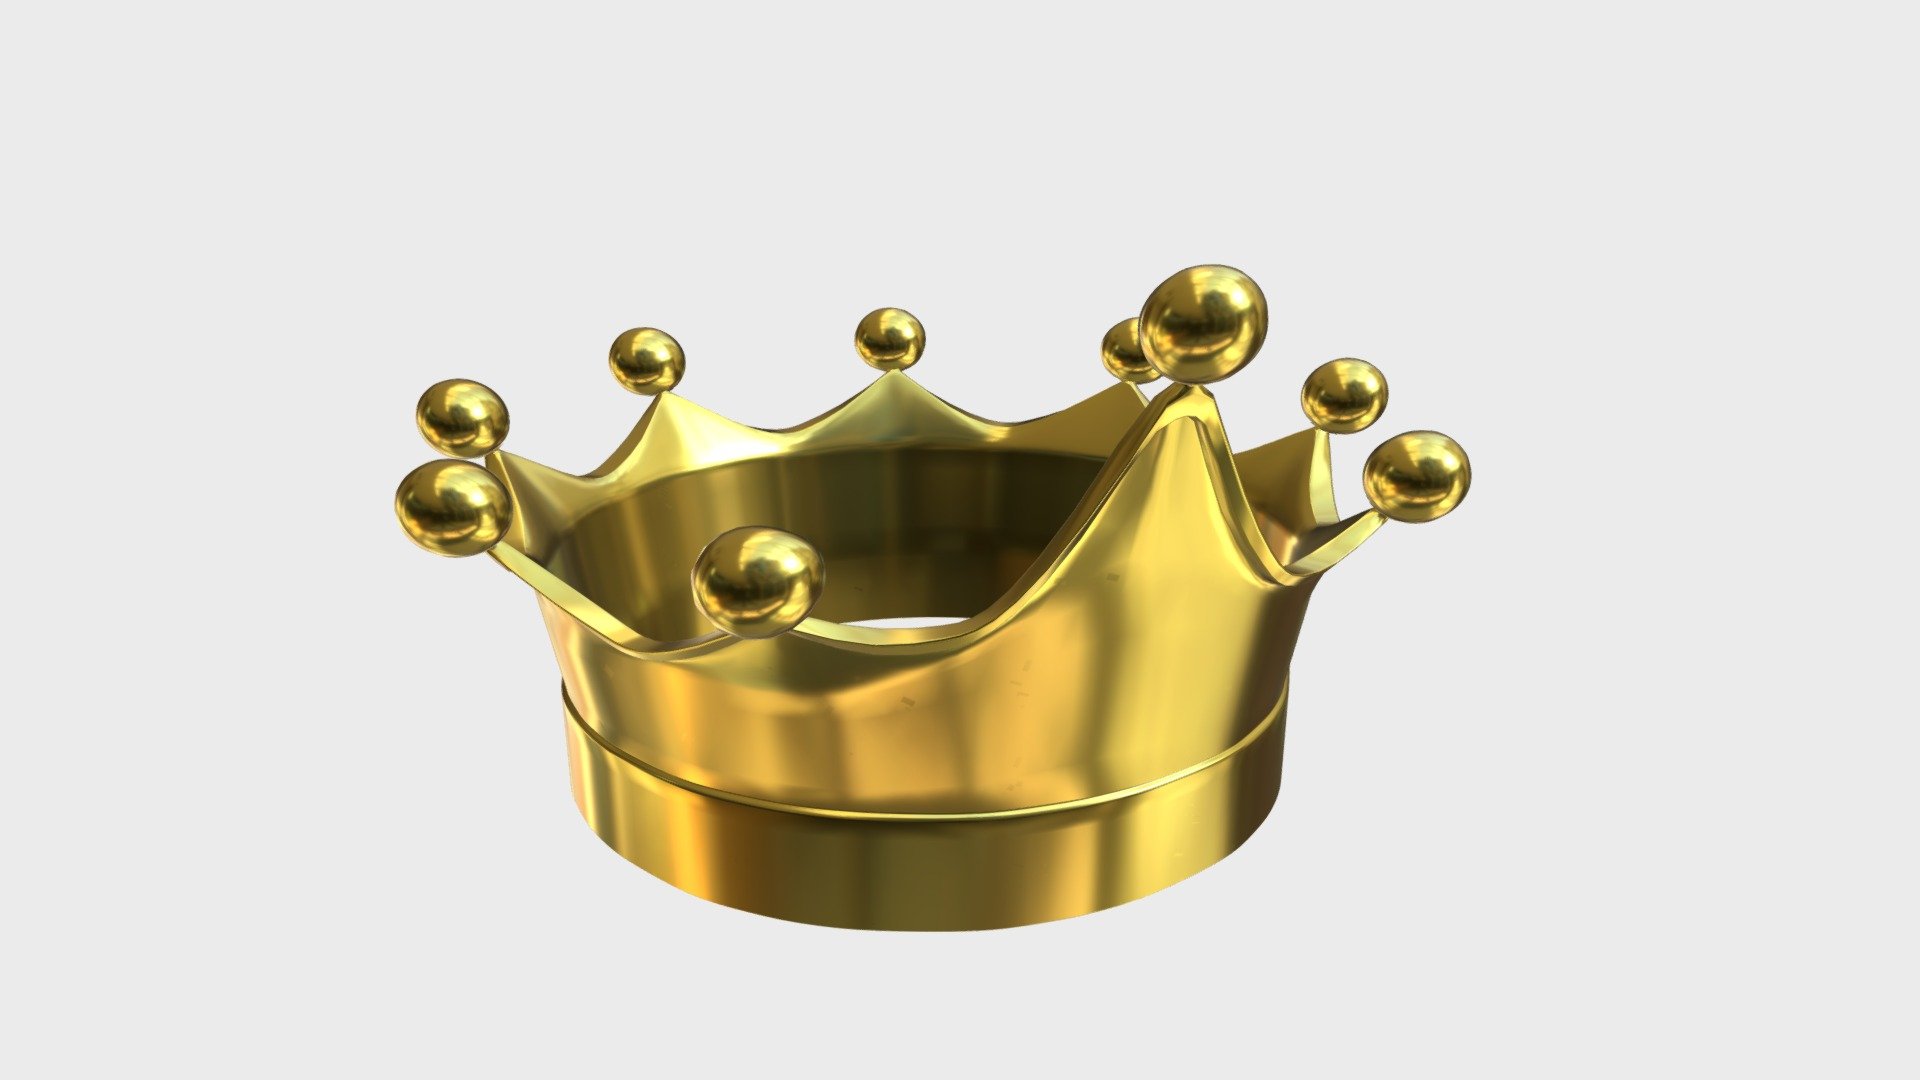 === The following description refers to the additional ZIP package provided with this model ===

Gold crown 3D Model, nr. 7 in my collection. Production-ready 3D Model, with PBR materials, textures, non overlapping UV Layout map provided in the package.

Quads only geometries (no tris/ngons).

Formats included: FBX, OBJ; scenes: BLEND (with Cycles / Eevee PBR Materials and Textures); other: png with Alpha.

1 Object (mesh), 1 PBR Material, UV unwrapped (non overlapping UV Layout map provided in the package); UV-mapped Textures.

UV Layout maps and Image Textures resolutions: 2048x2048; PBR Textures made with Substance Painter.

Polygonal, QUADS ONLY (no tris/ngons); 15228 vertices, 15228 quad faces (30456 tris).

Real world dimensions; scene scale units: cm in Blender 3.1 (that is: Metric with 0.01 scale).

Uniform scale object (scale applied in Blender 3.1) 3d model